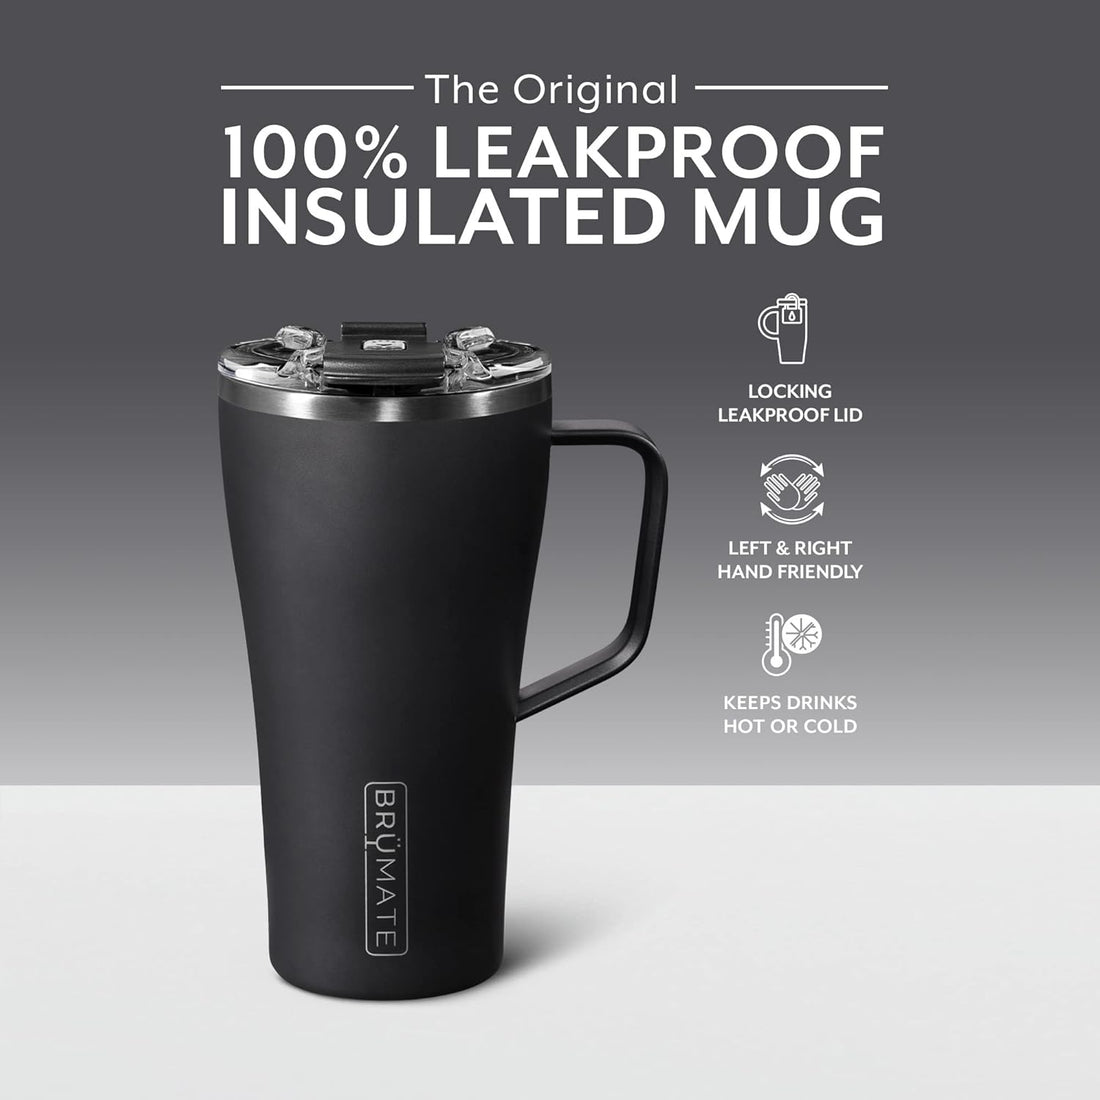 BrüMate Toddy 22oz 100% Leak Proof Insulated Coffee Mug with Handle & Lid - Stainless Steel Coffee Travel Mug - Double Walled Coffee Cup (Matte Black)